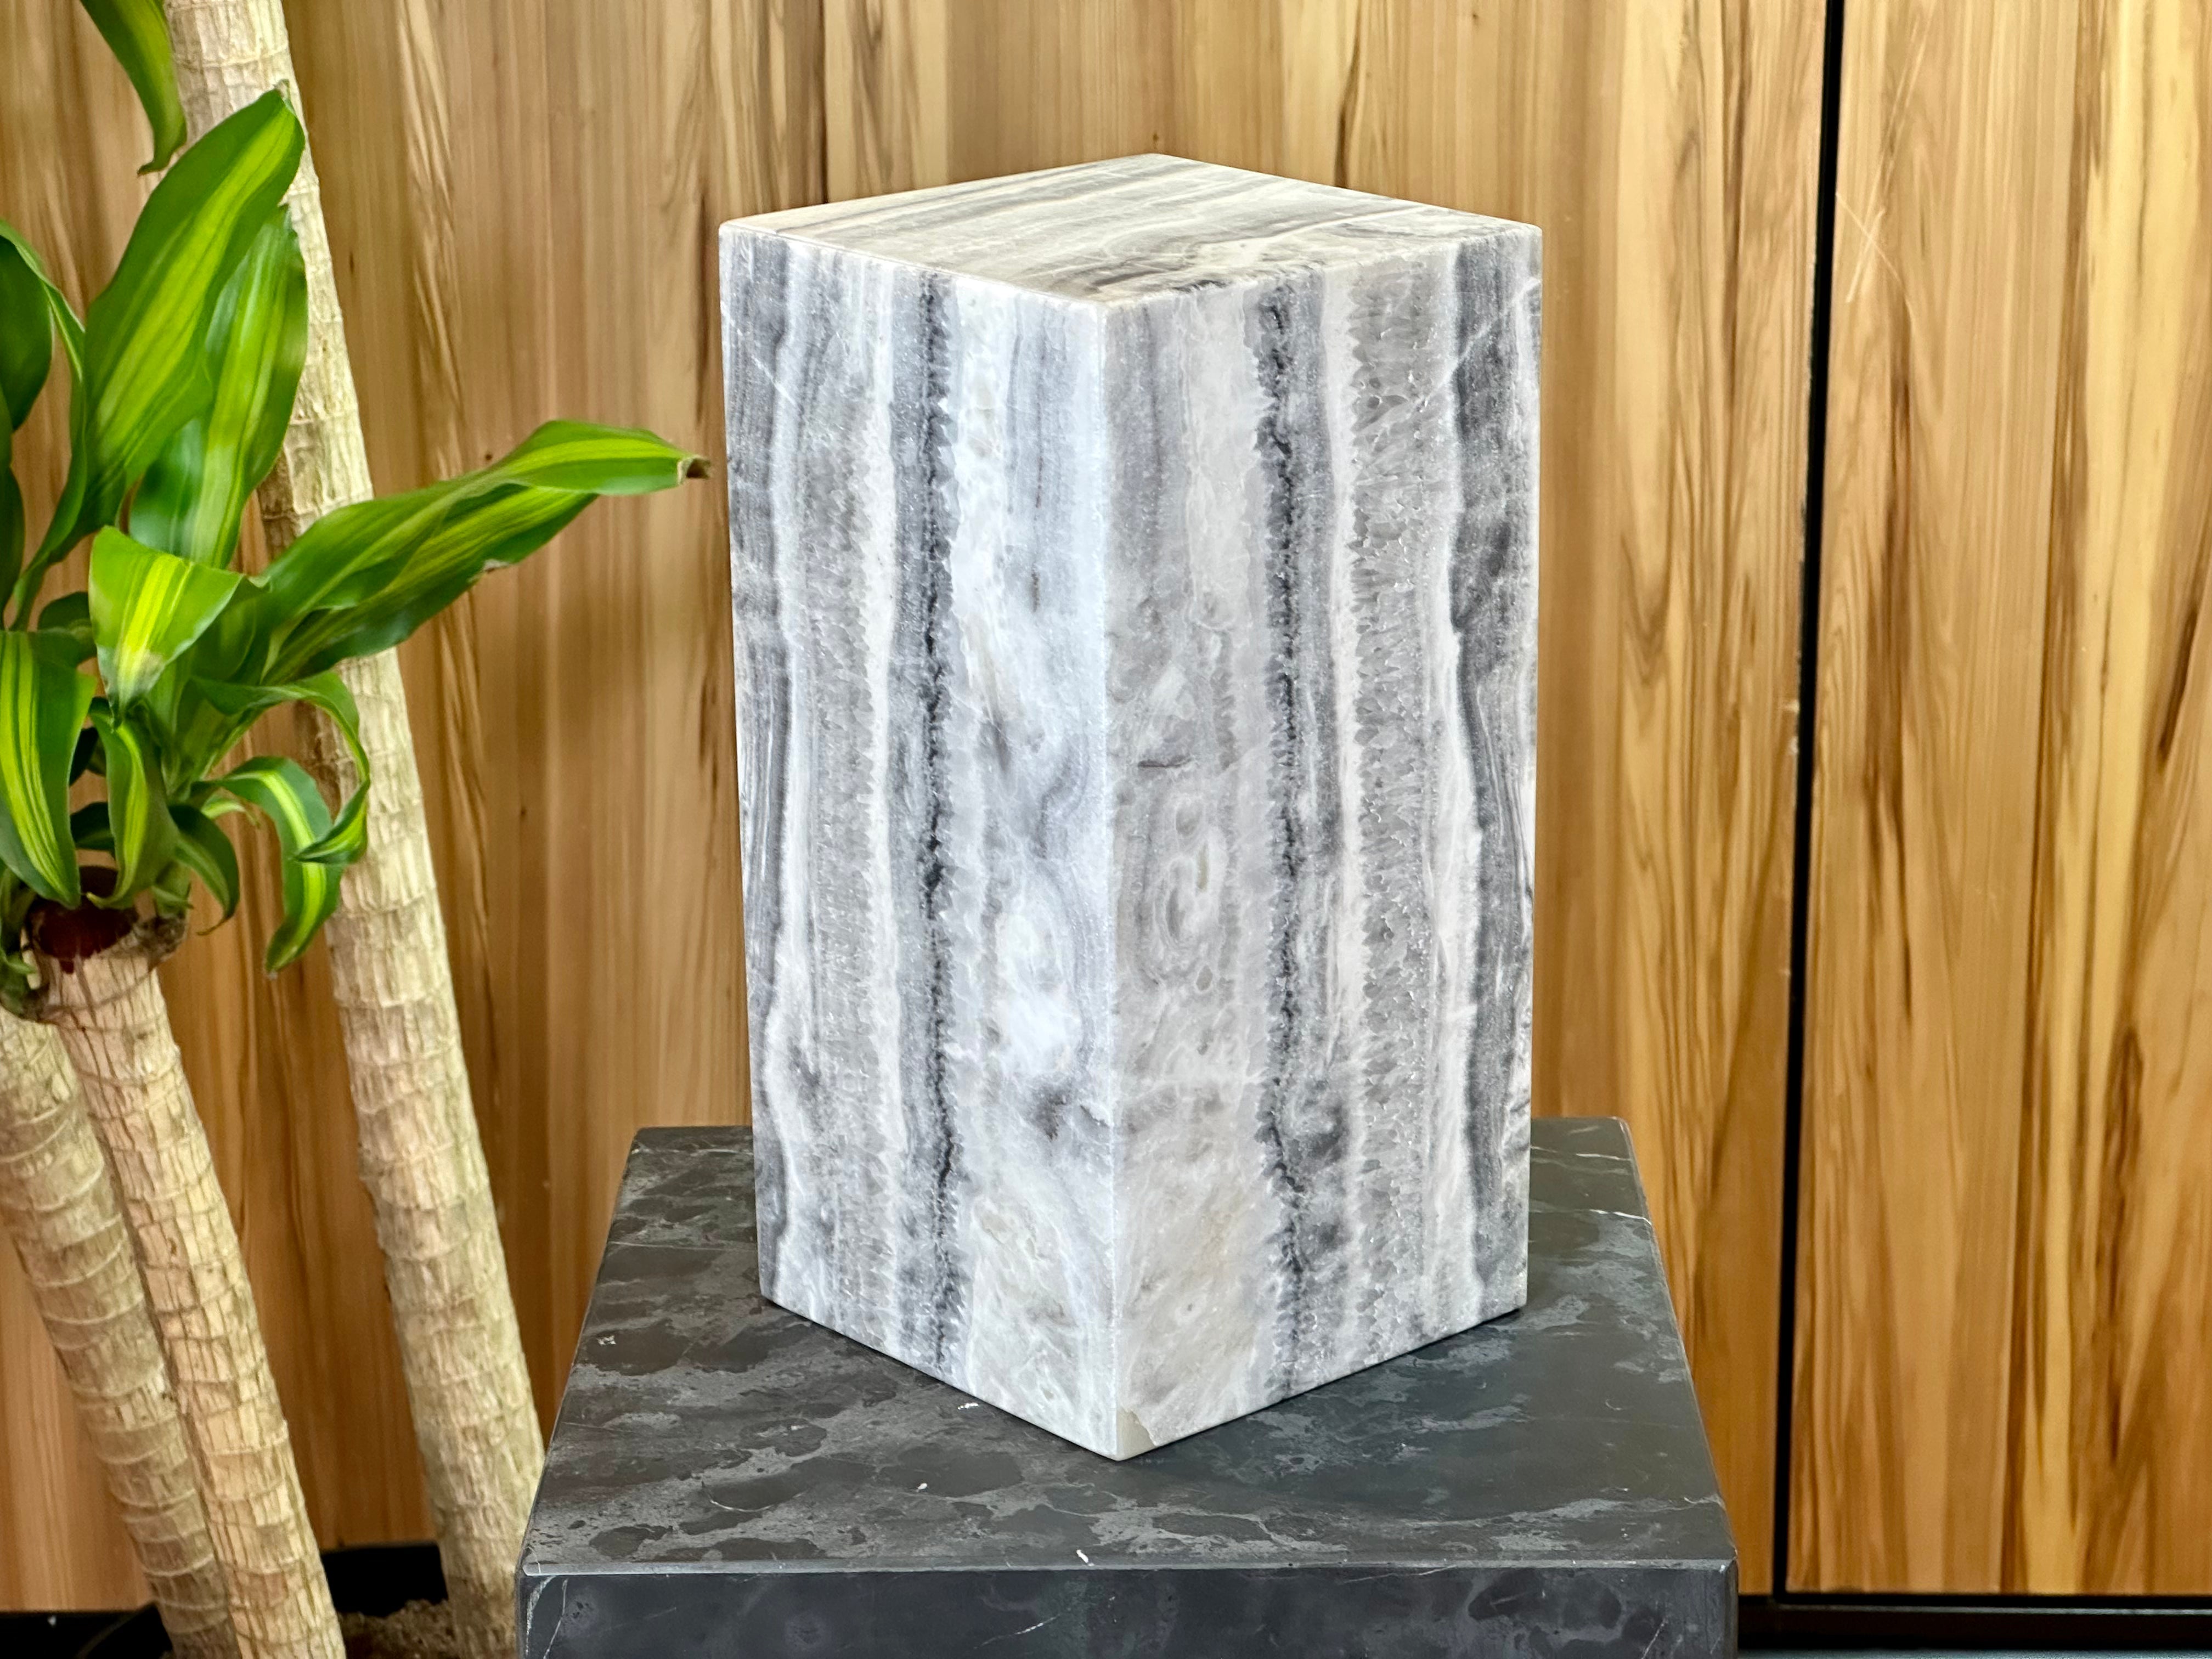 Designer Stone Lamps for Home Decor - Elevate your interior decor with handcrafted onyx lamps perfect for bedroom, living room or office